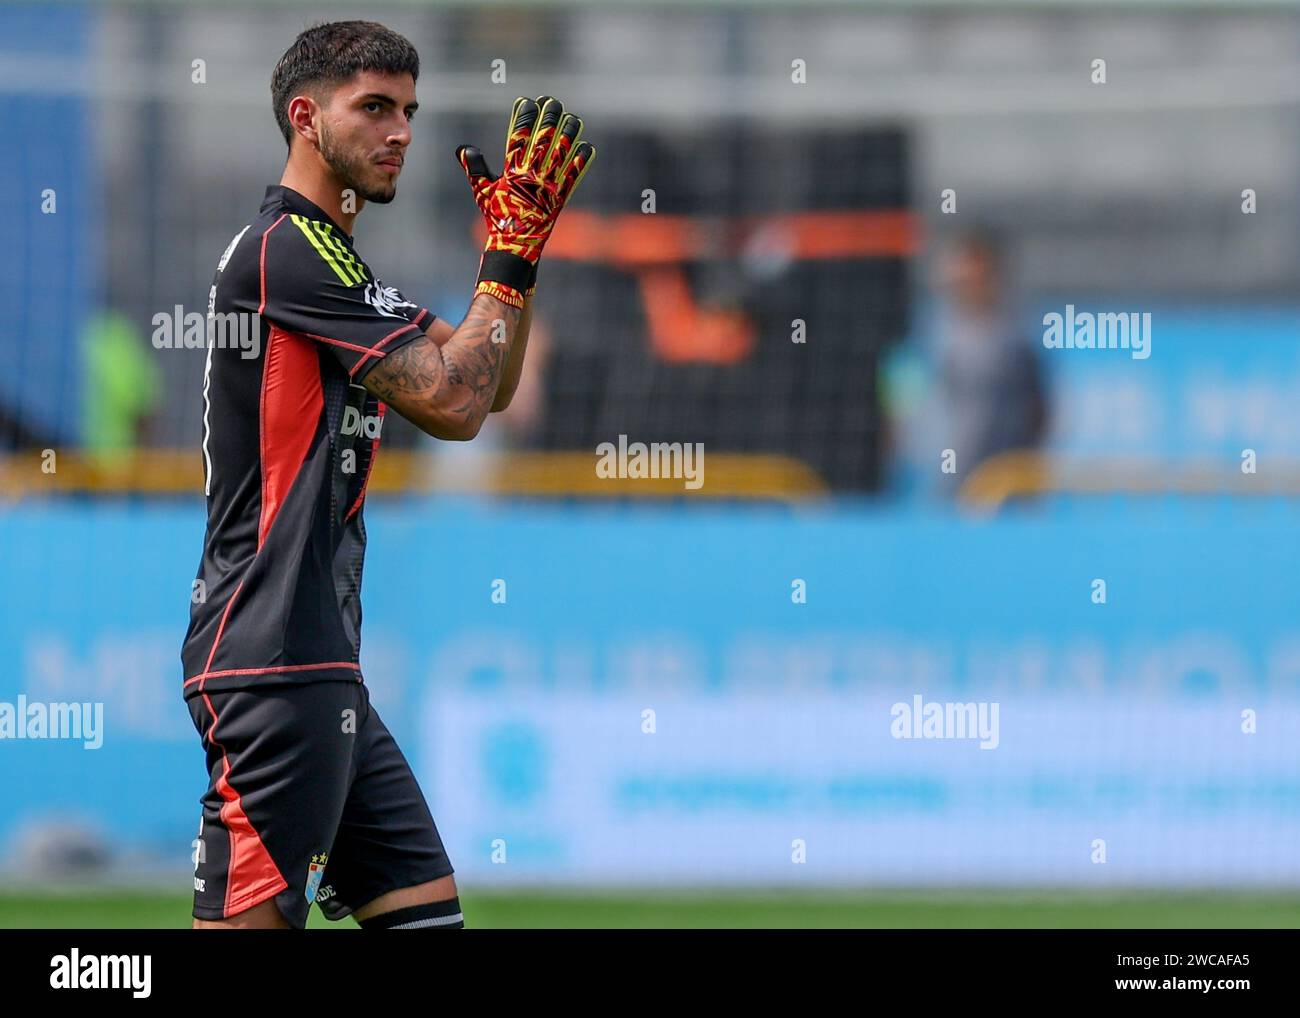 Lima, Peru. 14th Jan, 2024. Matias Cordova of Sporting Cristal during the friendly match between Sporting Cristal and Universidad Catolica de Chile played at Nacional Stadium on January 14, 2024 in Lima, Peru. (Photo by Miguel Marrufo/PRESSINPHOTO) Credit: PRESSINPHOTO SPORTS AGENCY/Alamy Live News Stock Photo